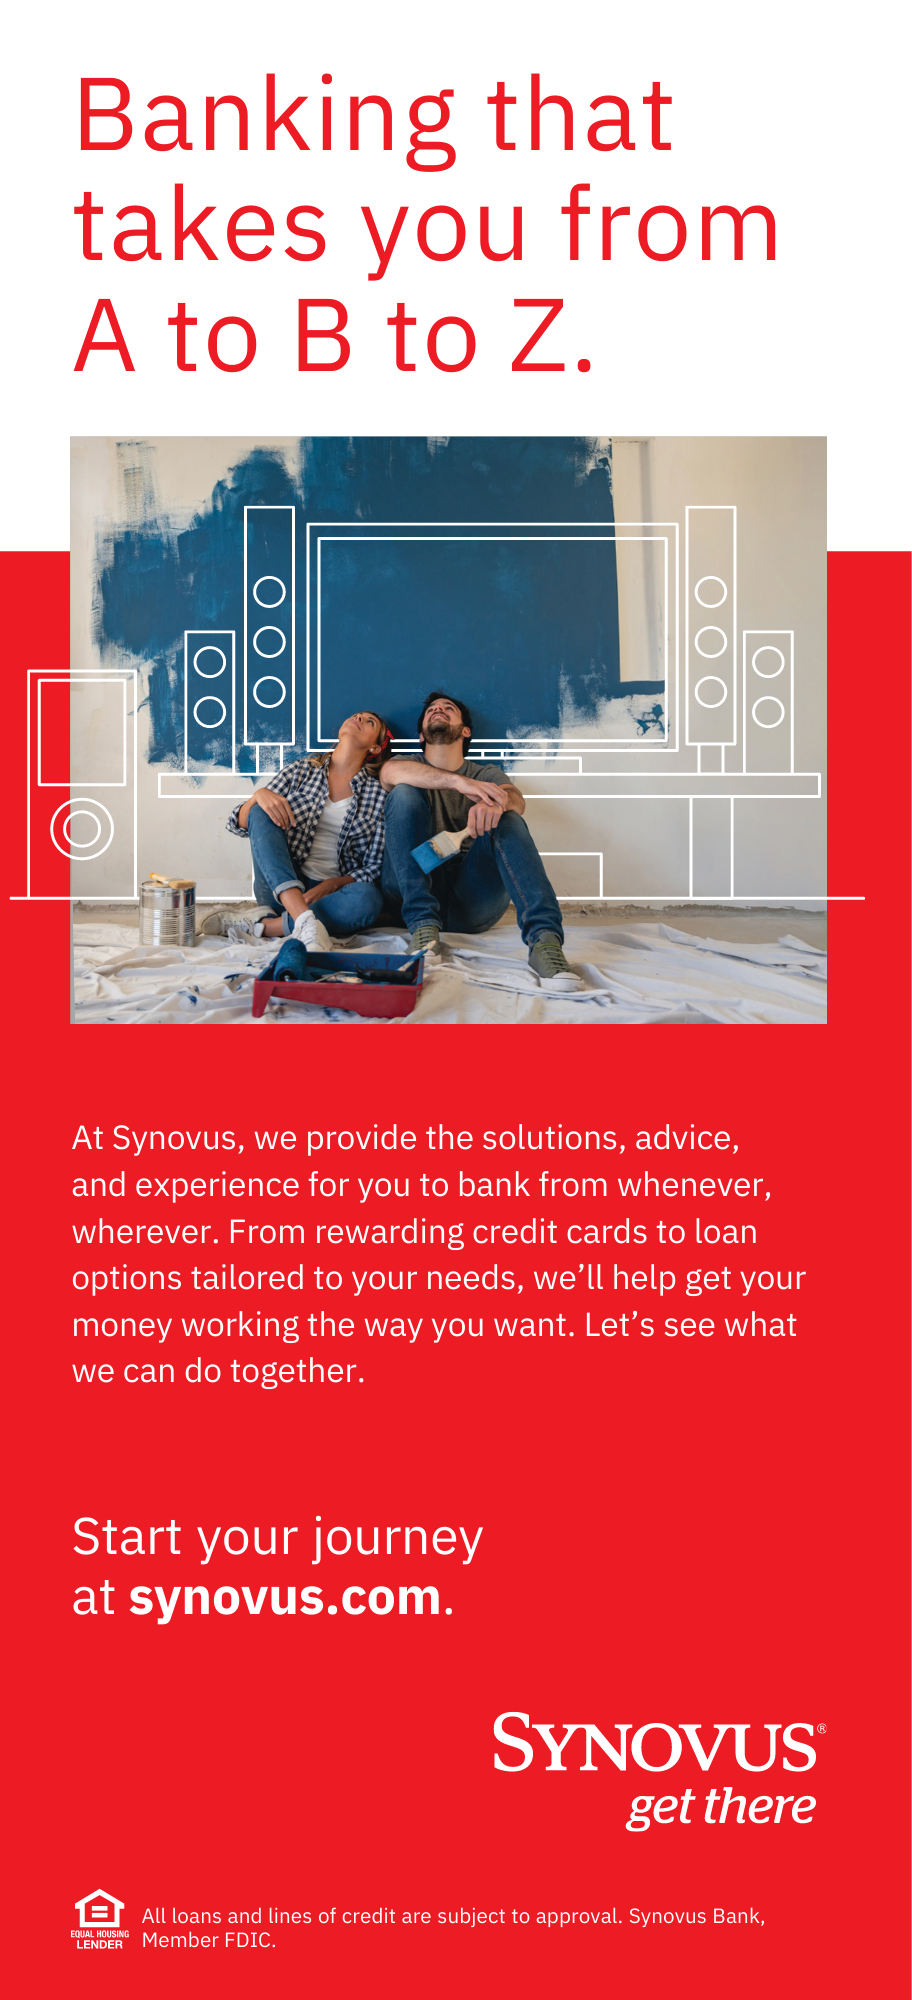 Synovus Bank Whether you’re remodeling your home, planning for recurring expenses (like a contractor’s bills or tuition payments), or keeping credit available for unexpected expenses, our 30-year Home Equity Line of Credit (HELOC) allows you to borrow against the equity in your home, using the money when and where you need it. We make it easy, convenient, and worry-free.